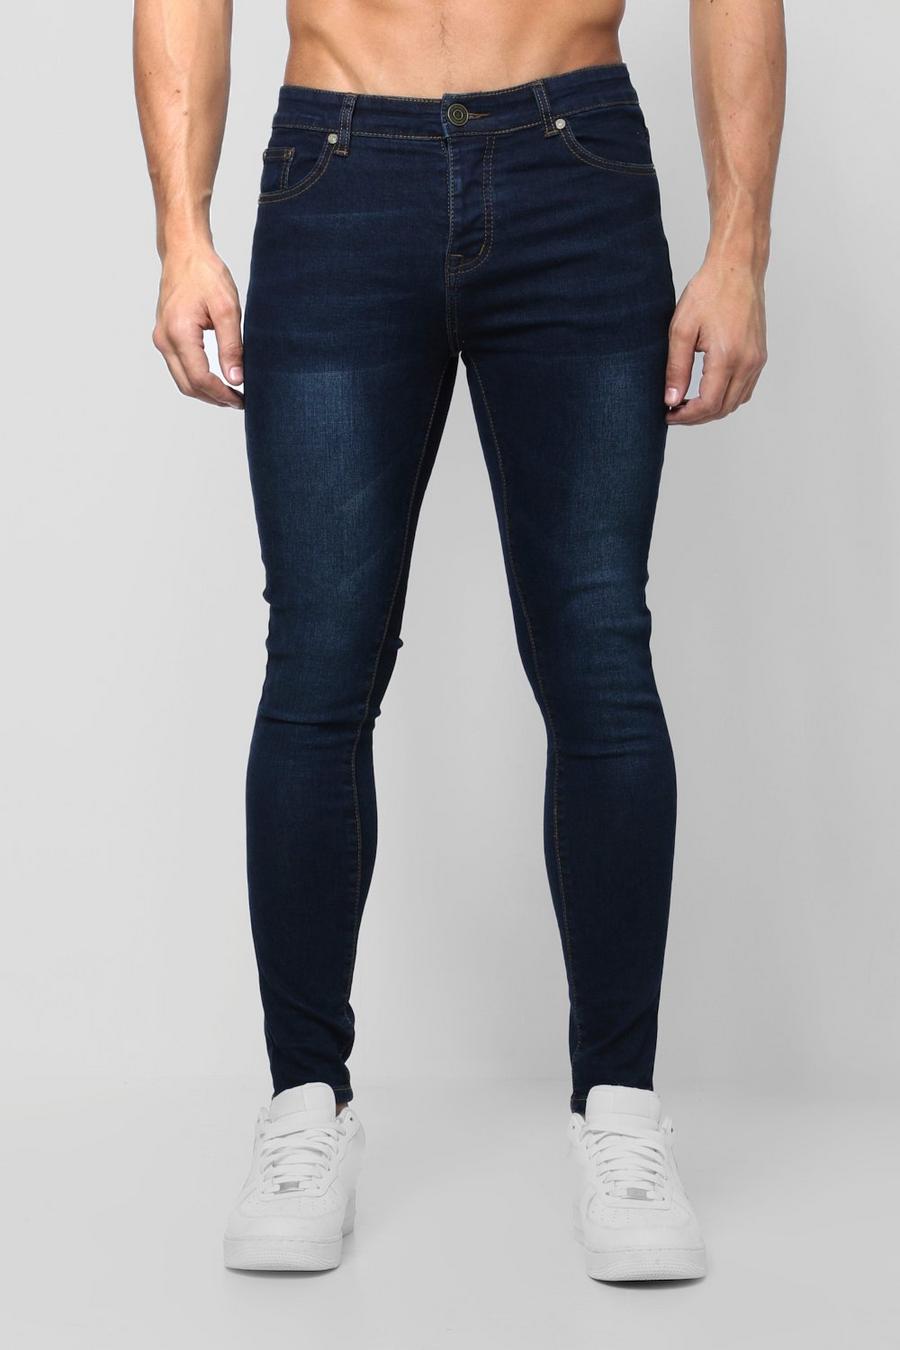 Spray On Skinny Jeans In Navy Wash image number 1